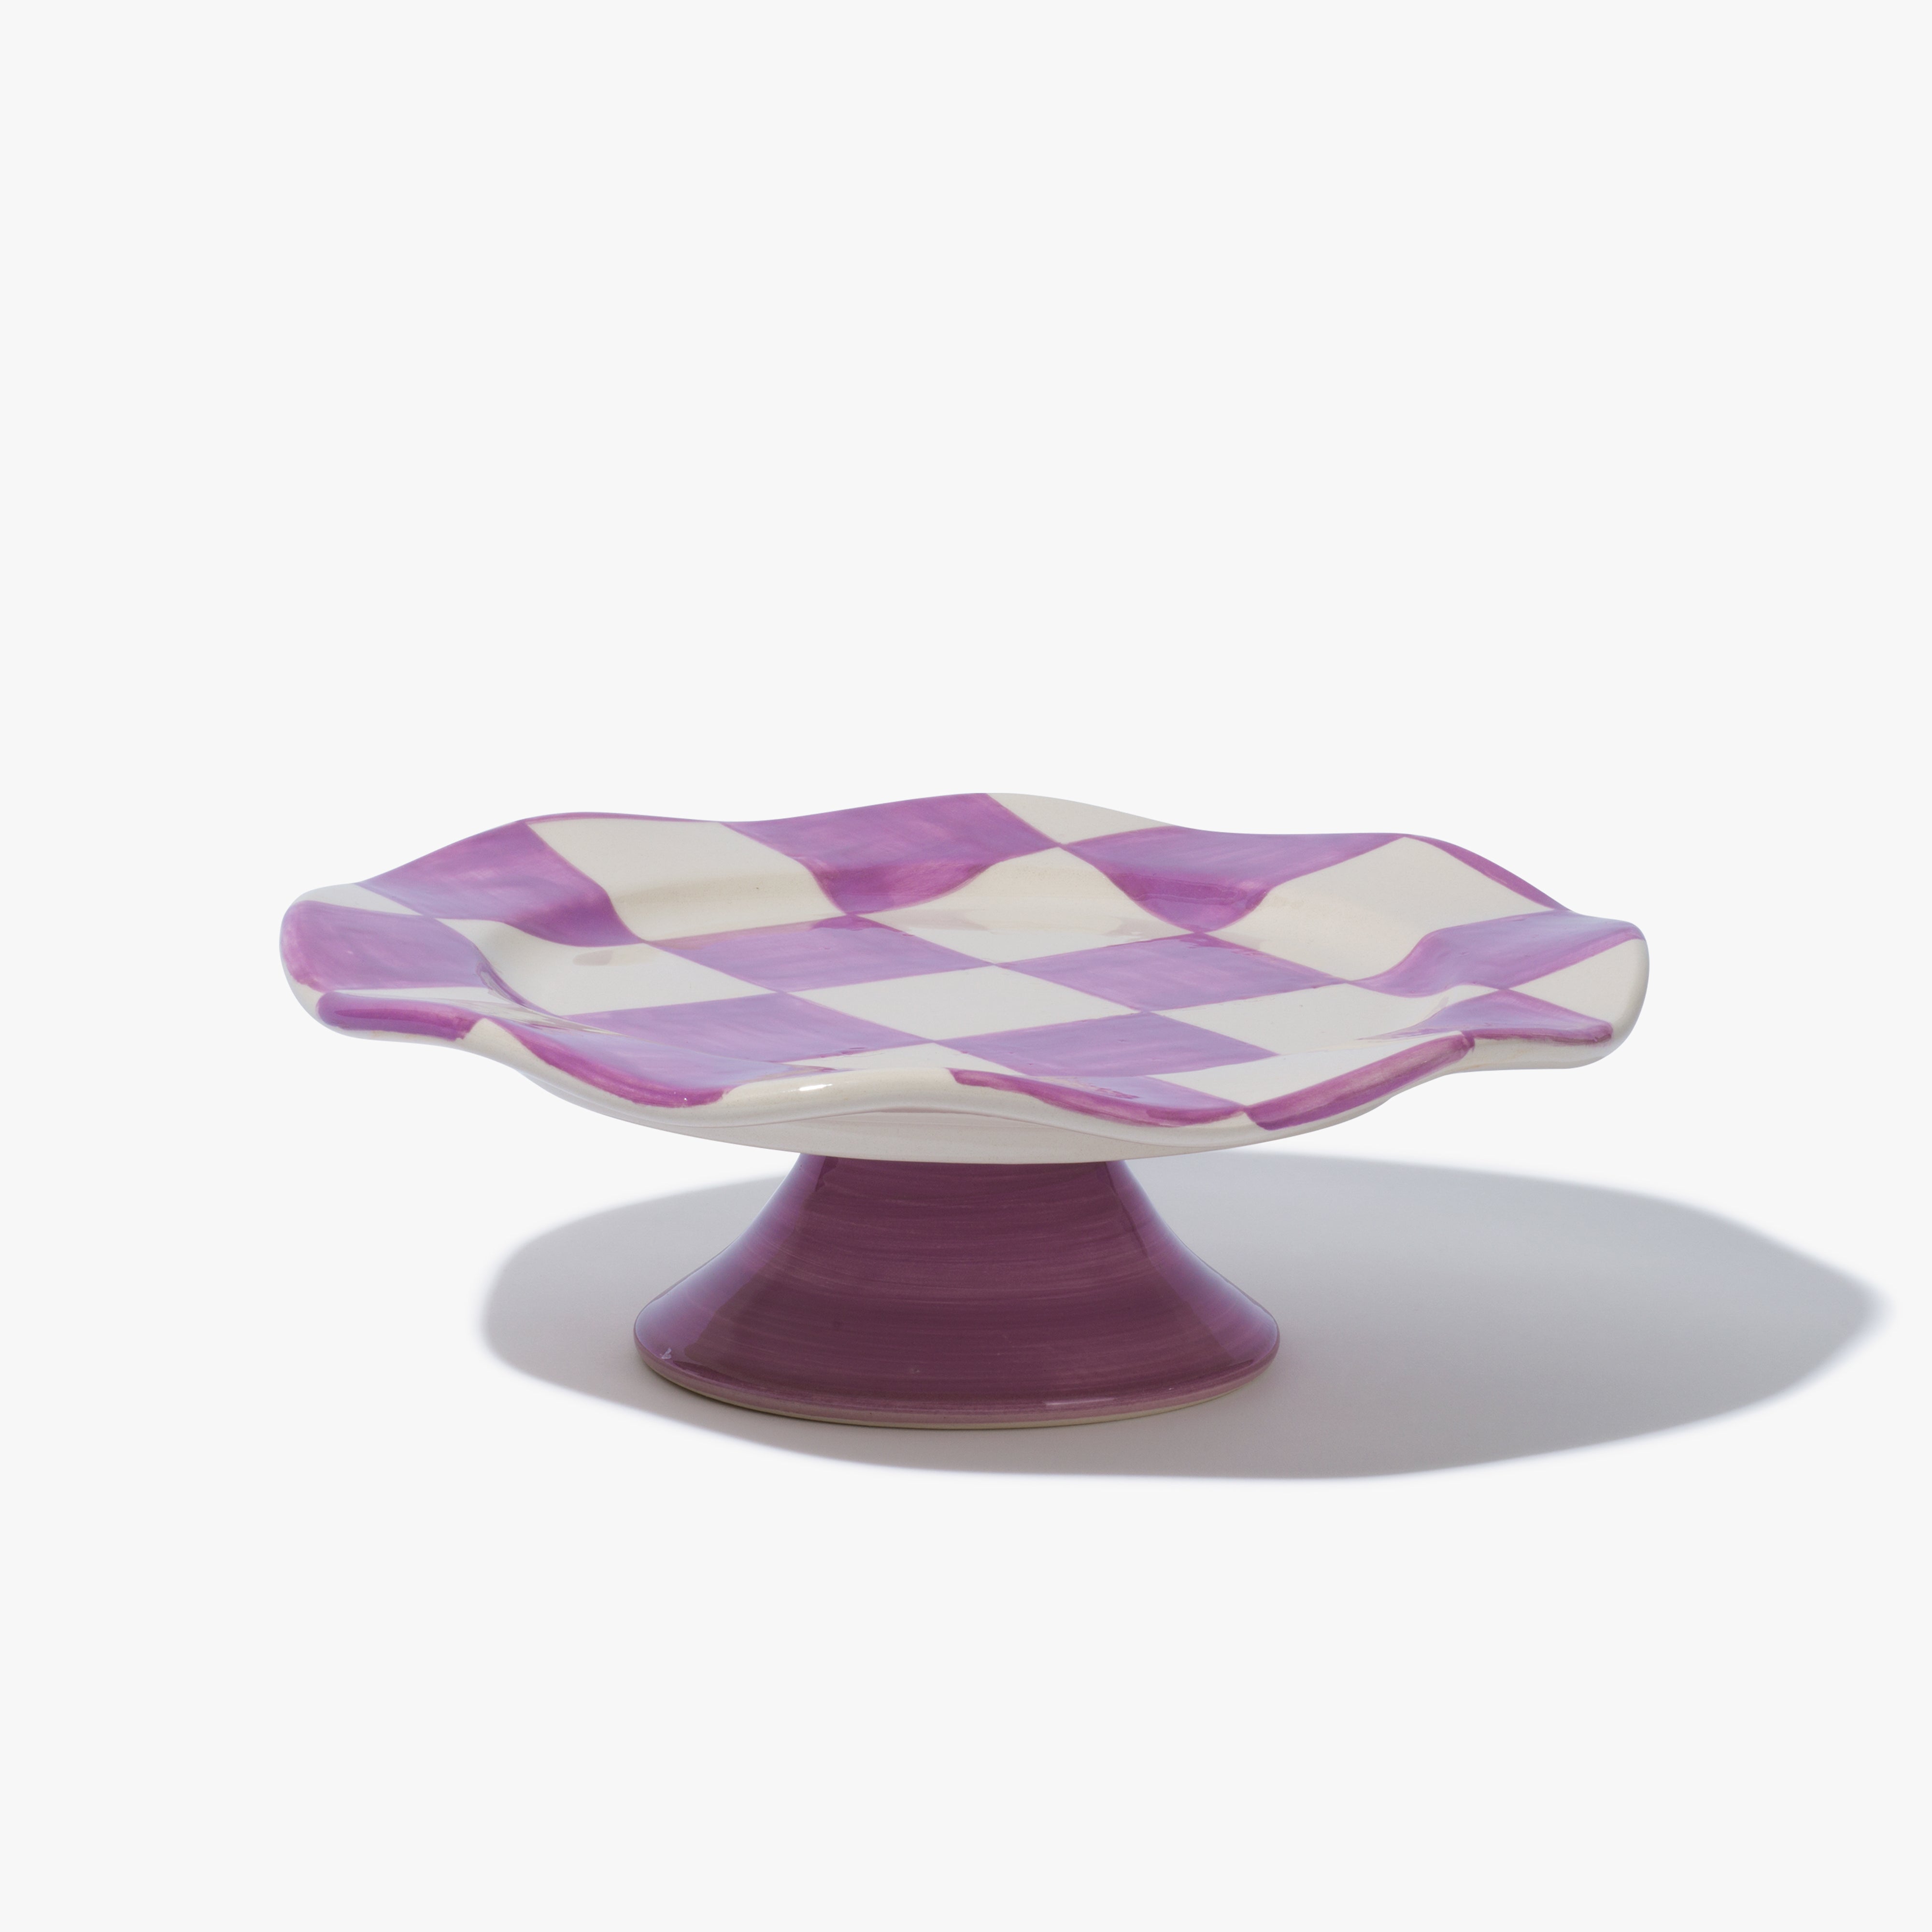 A cake stand with a purcple and white check pattern on the top and a purple base. It has a fluted/ scalloped rim. 